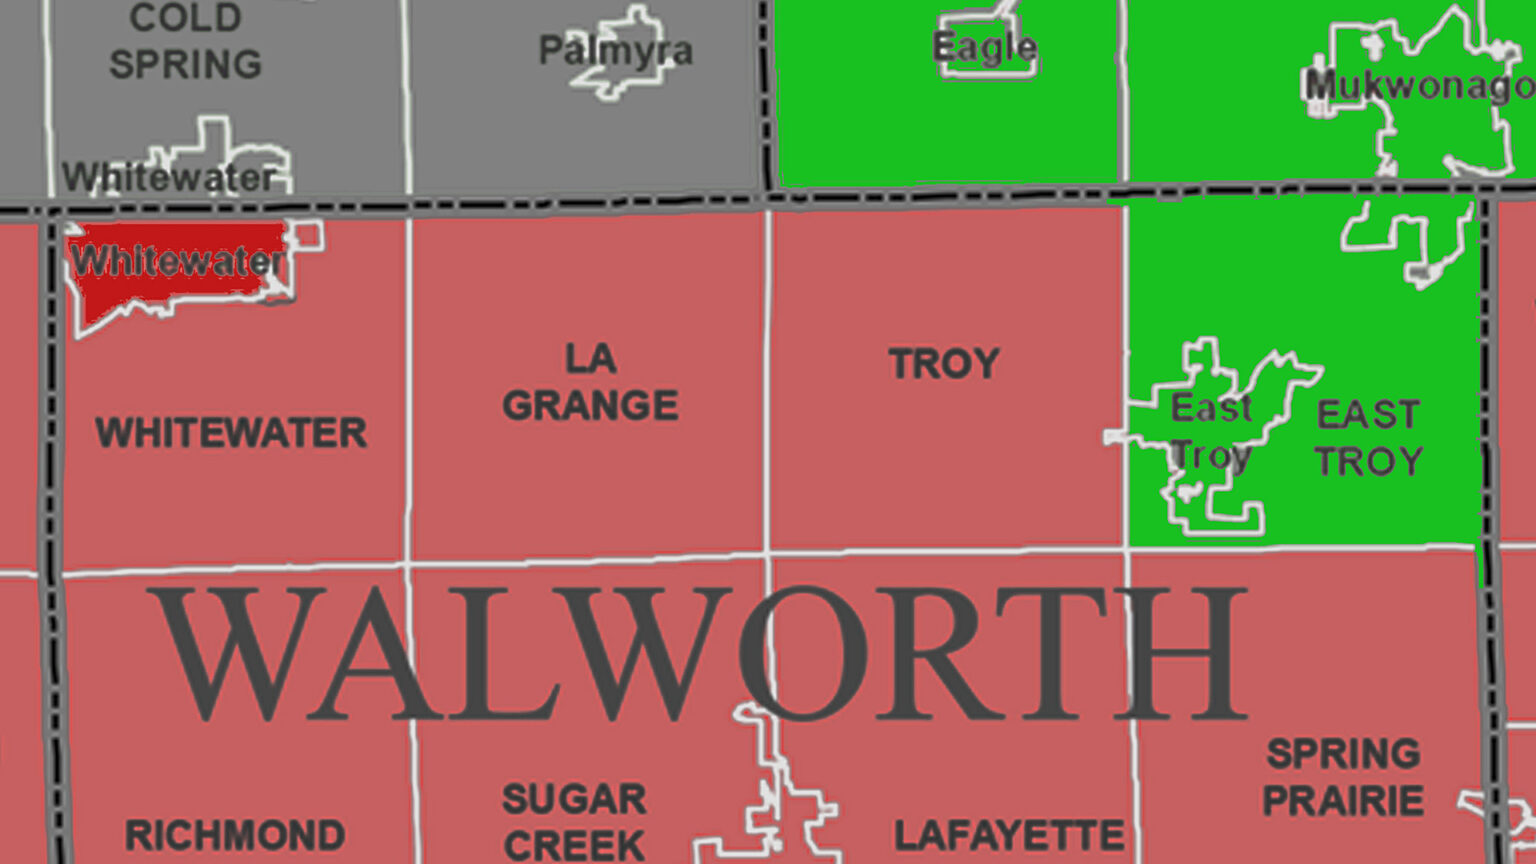 A crop of a map shows municipalities in Walworth County and adjacent counties color-coded to reflect their inclusion or exclusion from the 1st Congressional District following the 2022 redistricting.